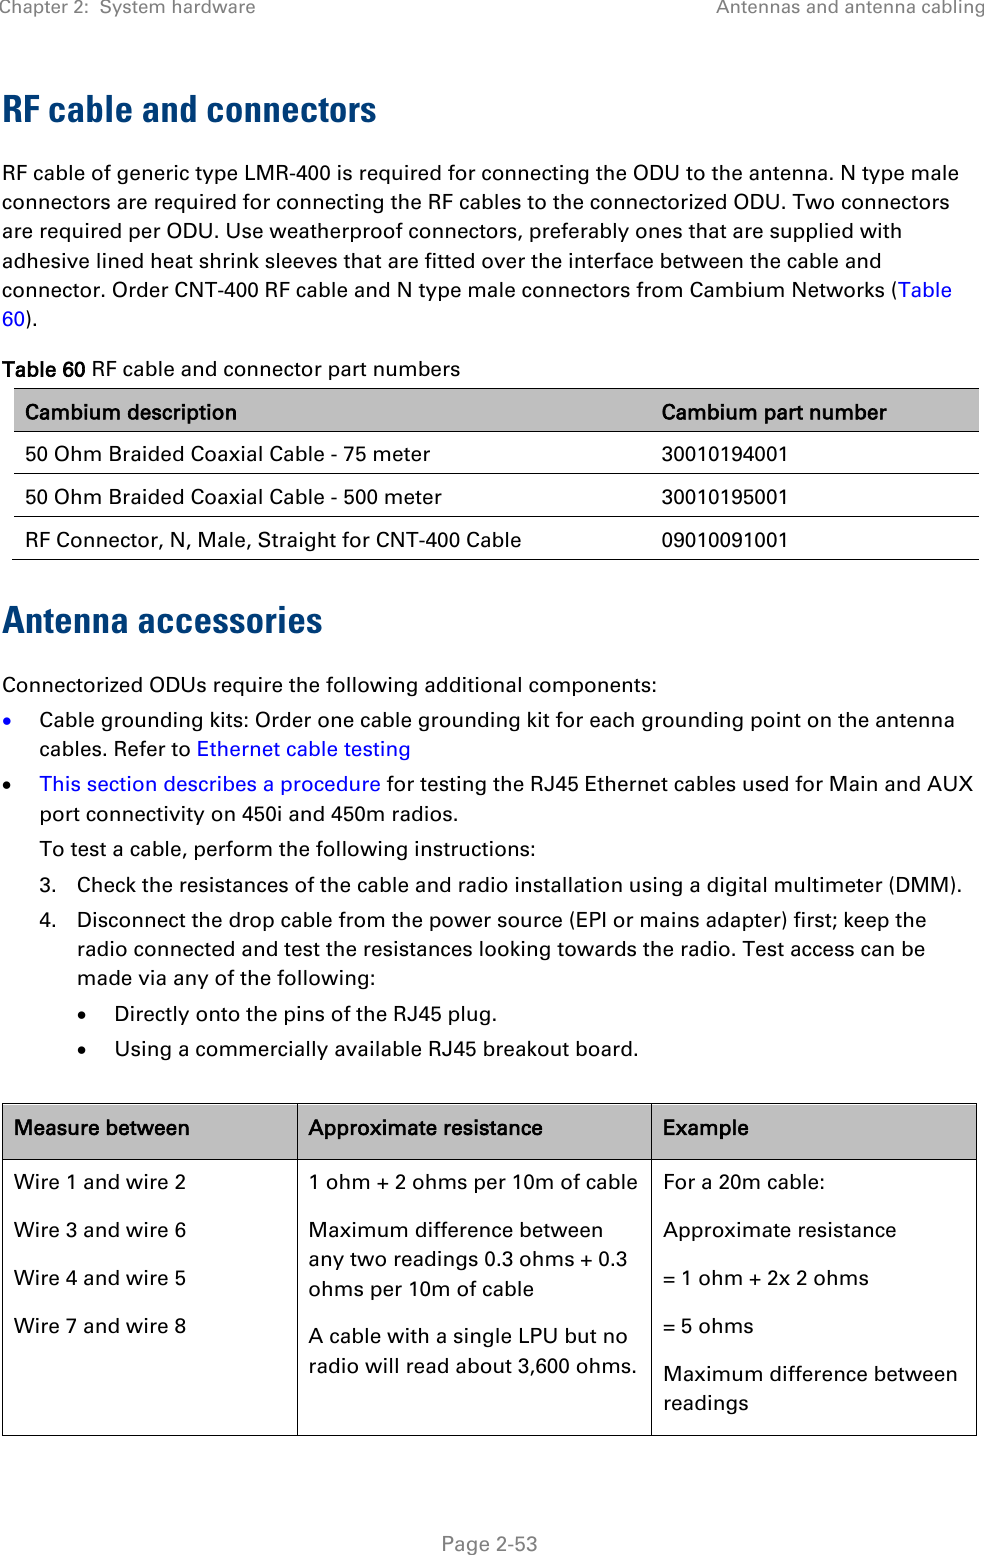 Chapter 2:  System hardware Antennas and antenna cabling   Page 2-53 RF cable and connectors RF cable of generic type LMR-400 is required for connecting the ODU to the antenna. N type male connectors are required for connecting the RF cables to the connectorized ODU. Two connectors are required per ODU. Use weatherproof connectors, preferably ones that are supplied with adhesive lined heat shrink sleeves that are fitted over the interface between the cable and connector. Order CNT-400 RF cable and N type male connectors from Cambium Networks (Table 60). Table 60 RF cable and connector part numbers Cambium description Cambium part number 50 Ohm Braided Coaxial Cable - 75 meter 30010194001 50 Ohm Braided Coaxial Cable - 500 meter 30010195001 RF Connector, N, Male, Straight for CNT-400 Cable 09010091001 Antenna accessories Connectorized ODUs require the following additional components: • Cable grounding kits: Order one cable grounding kit for each grounding point on the antenna cables. Refer to Ethernet cable testing • This section describes a procedure for testing the RJ45 Ethernet cables used for Main and AUX port connectivity on 450i and 450m radios. To test a cable, perform the following instructions: 3. Check the resistances of the cable and radio installation using a digital multimeter (DMM).  4. Disconnect the drop cable from the power source (EPI or mains adapter) first; keep the radio connected and test the resistances looking towards the radio. Test access can be made via any of the following: • Directly onto the pins of the RJ45 plug. • Using a commercially available RJ45 breakout board.  Measure between Approximate resistance Example Wire 1 and wire 2 Wire 3 and wire 6 Wire 4 and wire 5 Wire 7 and wire 8 1 ohm + 2 ohms per 10m of cable Maximum difference between any two readings 0.3 ohms + 0.3 ohms per 10m of cable A cable with a single LPU but no radio will read about 3,600 ohms. For a 20m cable: Approximate resistance = 1 ohm + 2x 2 ohms = 5 ohms Maximum difference between readings 